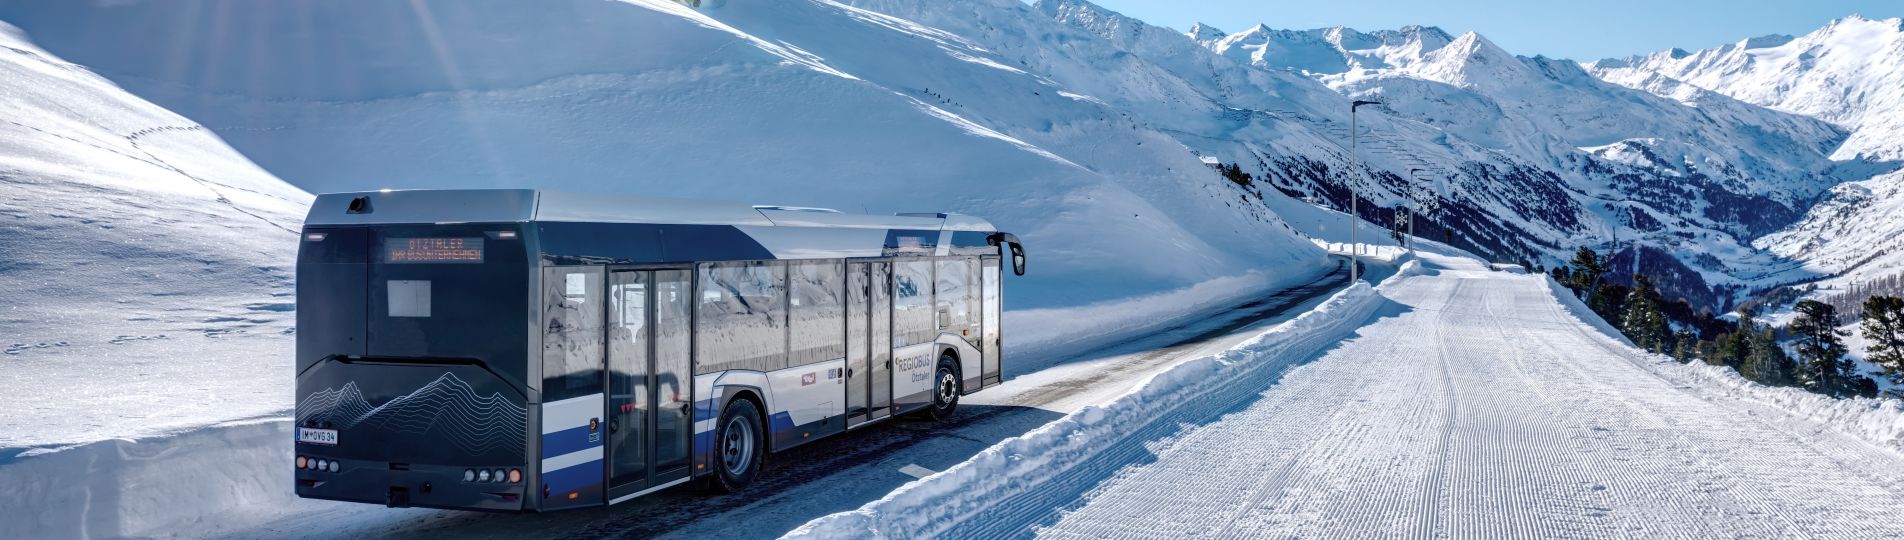 Solaris buses perfectly prepared for difficult winter conditions